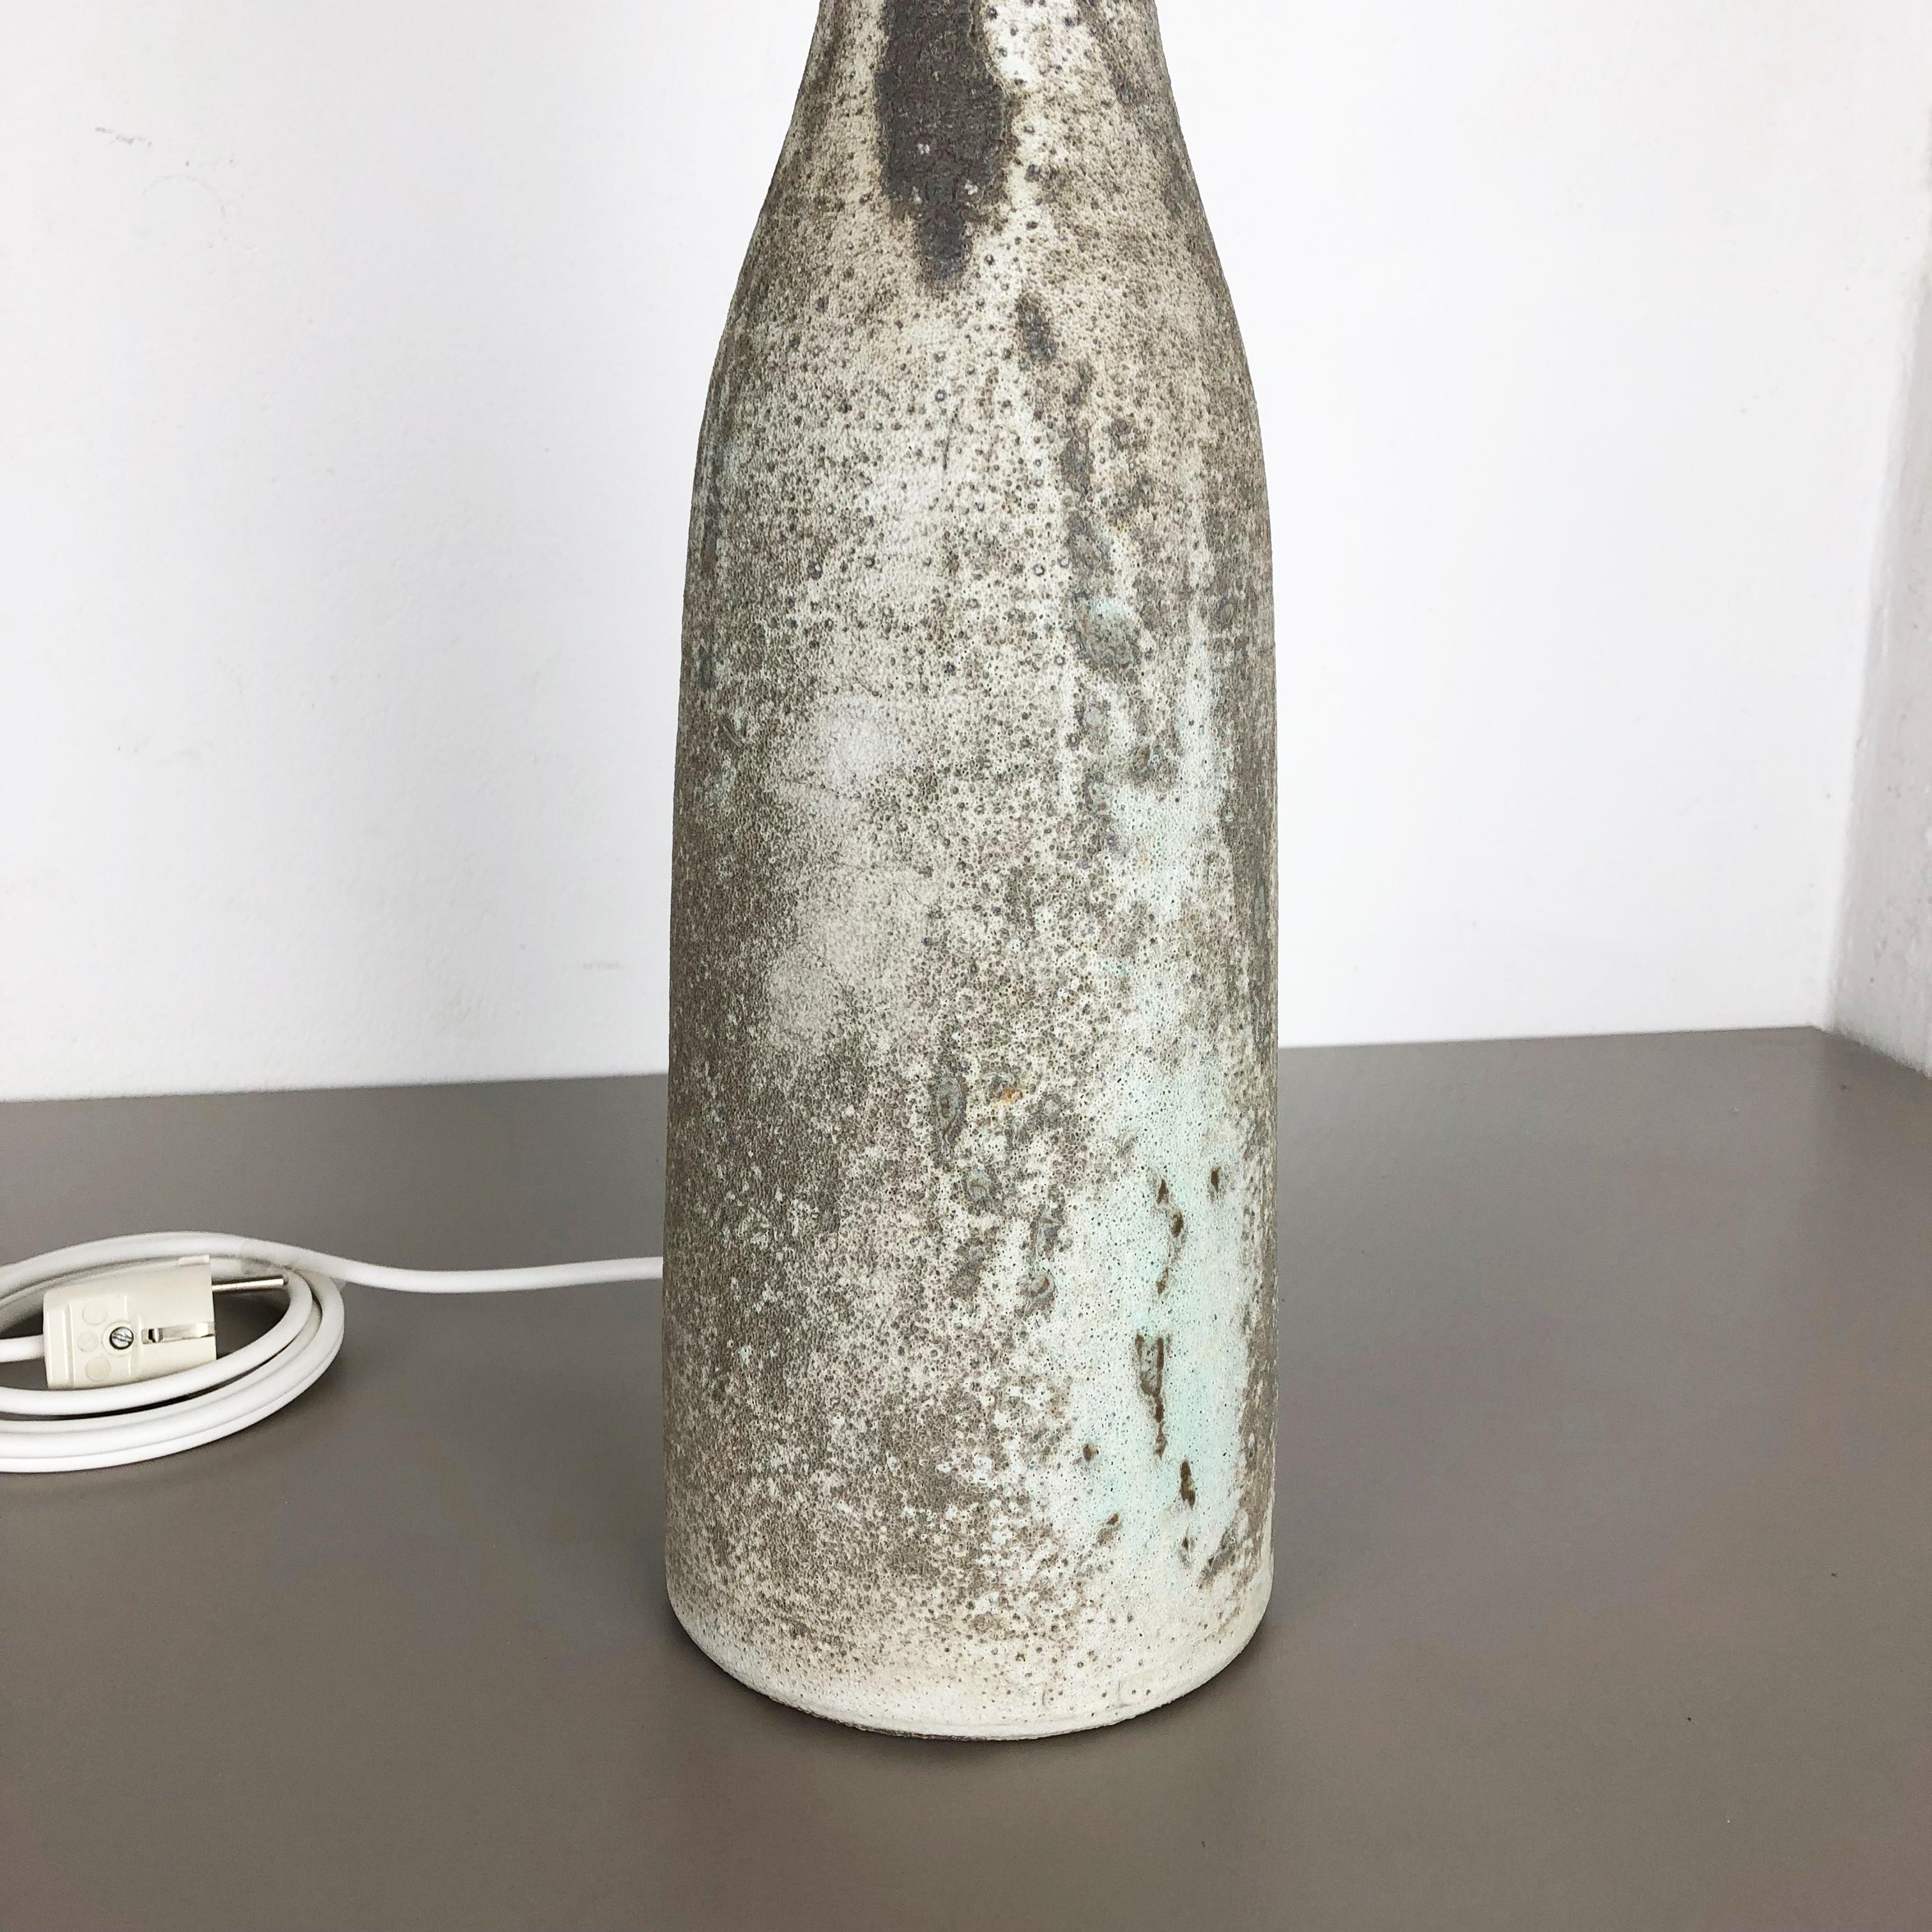 Ceramic Studio Pottery Table Light by Piet Knepper for Mobach, Netherlands 1960s In Good Condition For Sale In Kirchlengern, DE